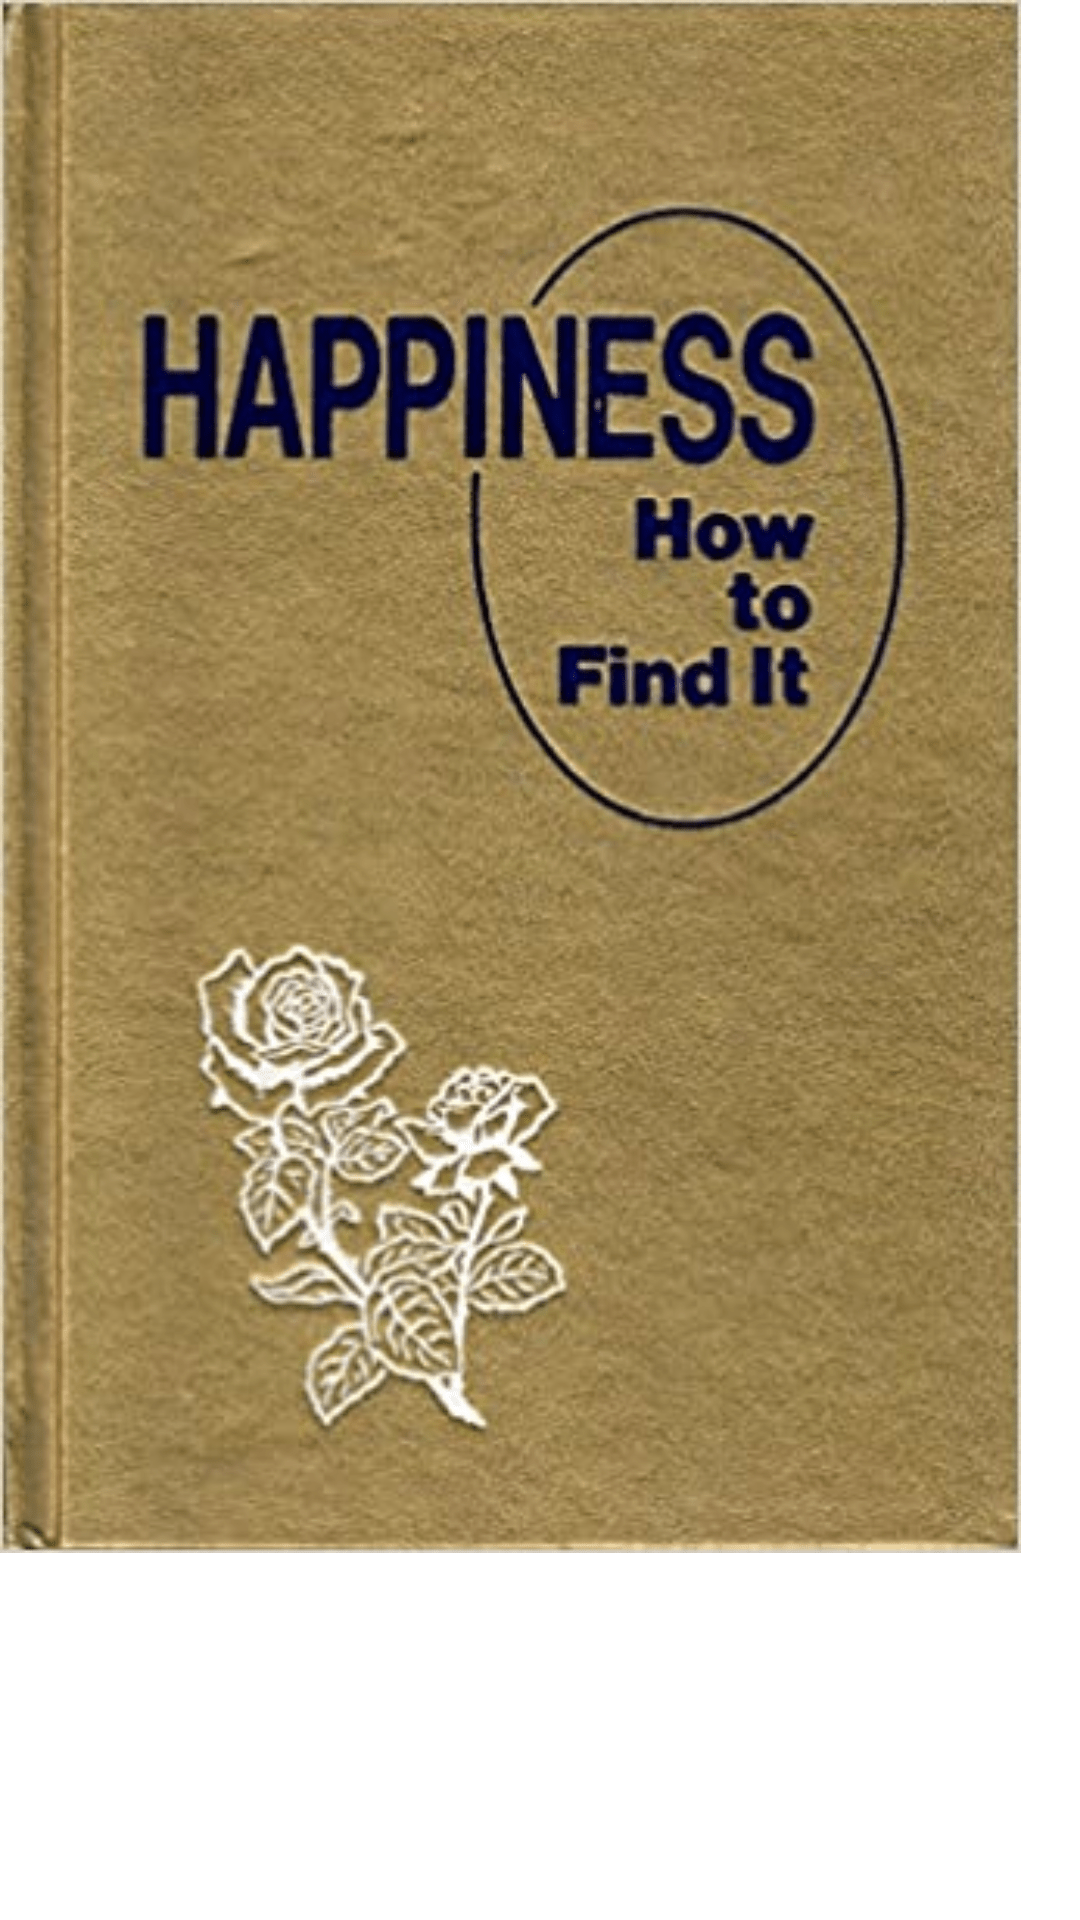 Happiness: How to Find It